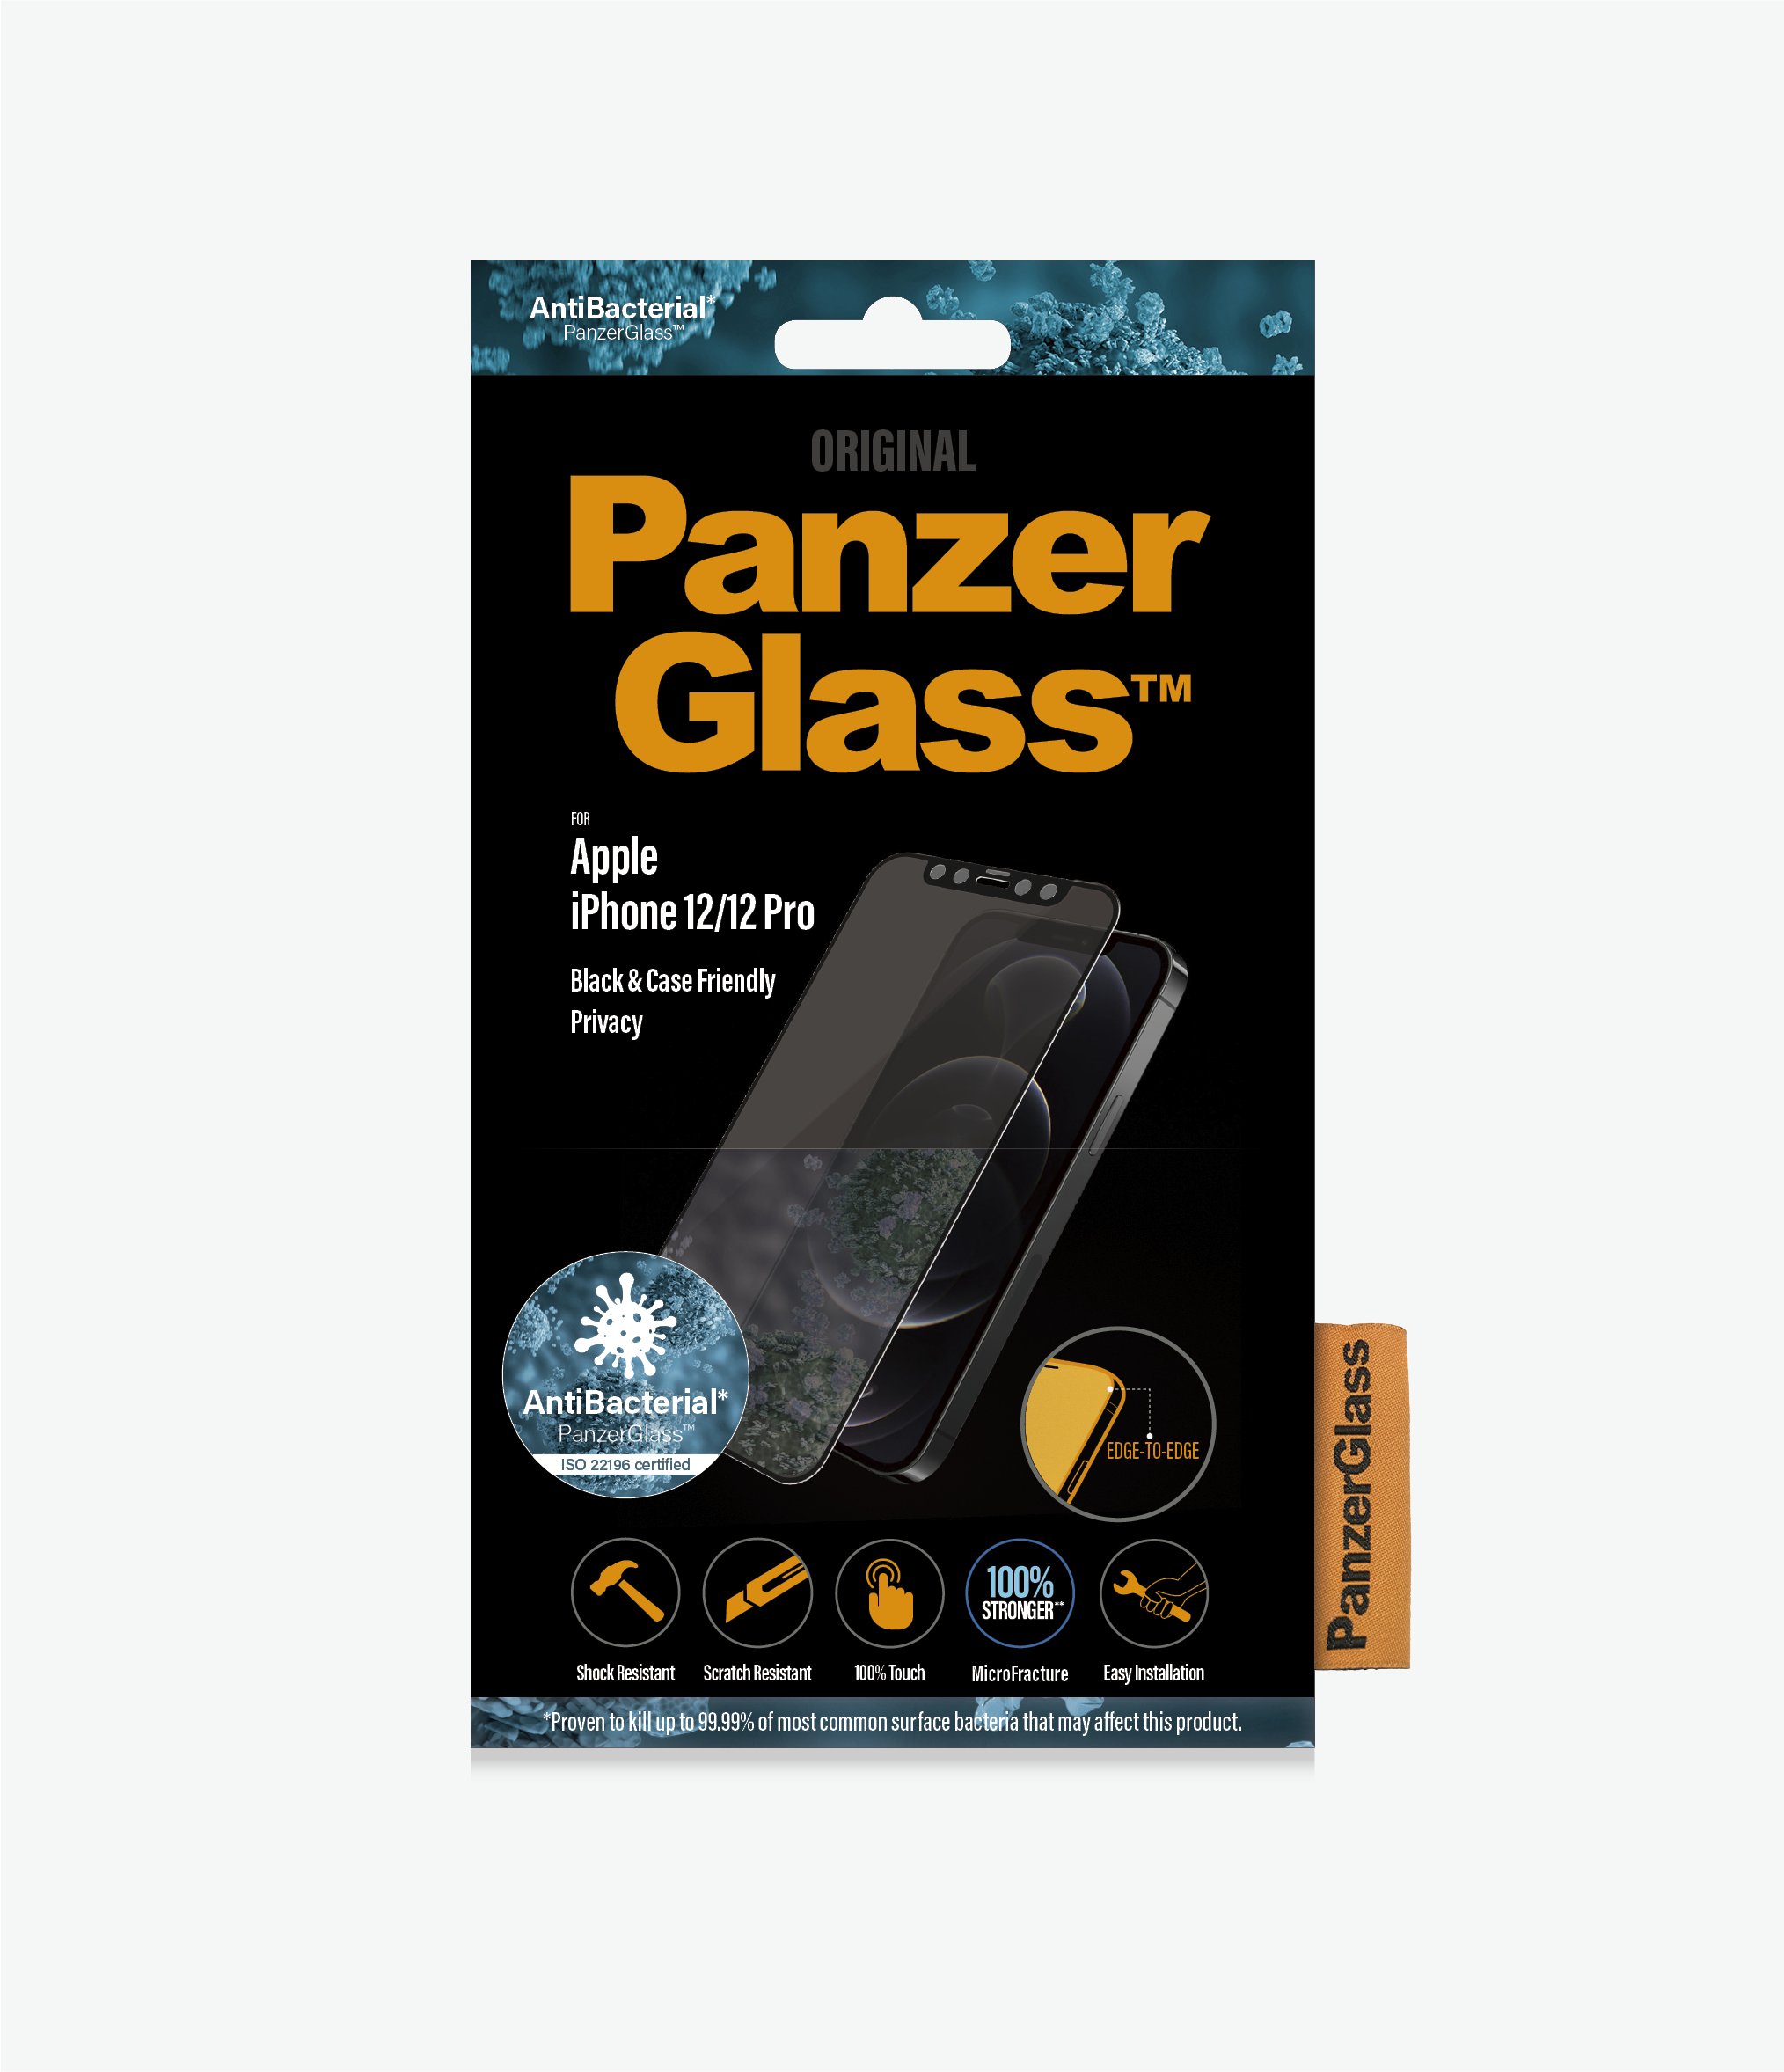 PanzerGlass™ Apple iPhone 12/12 Pro Black (P2711) - Privacy - Screen Protector - Resistant to scratches and bacteria, Shock absorbing, 100% touch